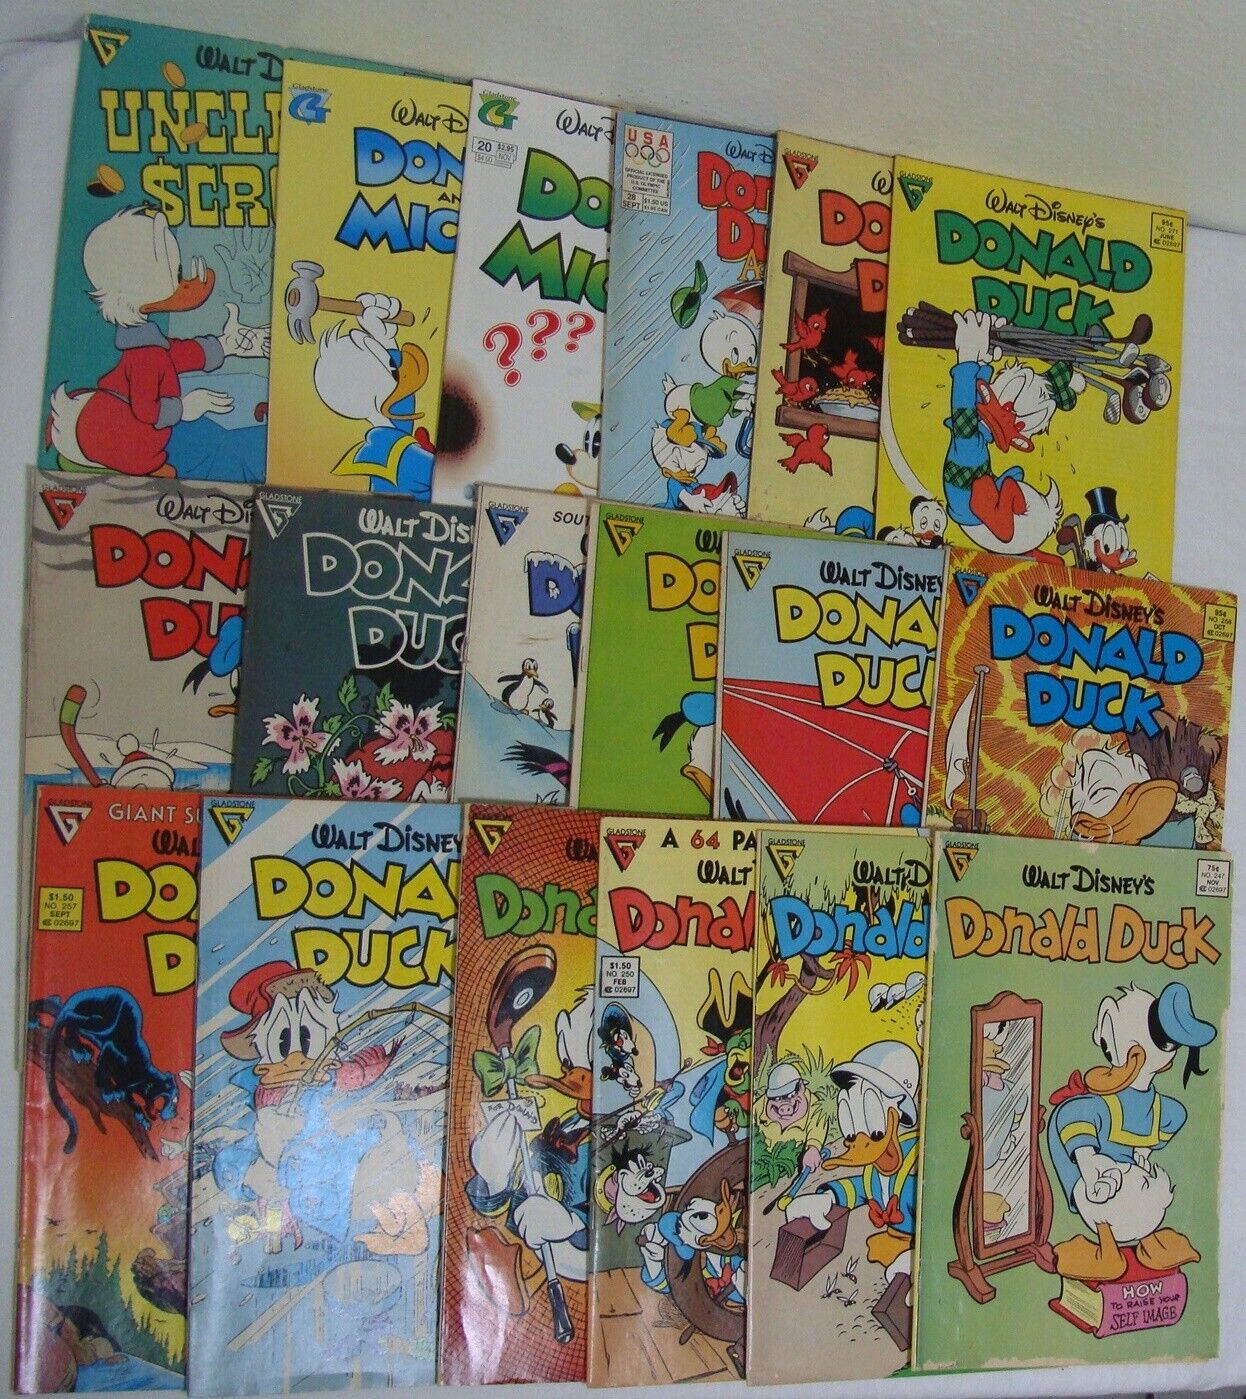 WALT DISNEY’S DONALD DUCK UNCLE SCROOGE  MICKEY MOUSE  Large Lot Of 18 Readers